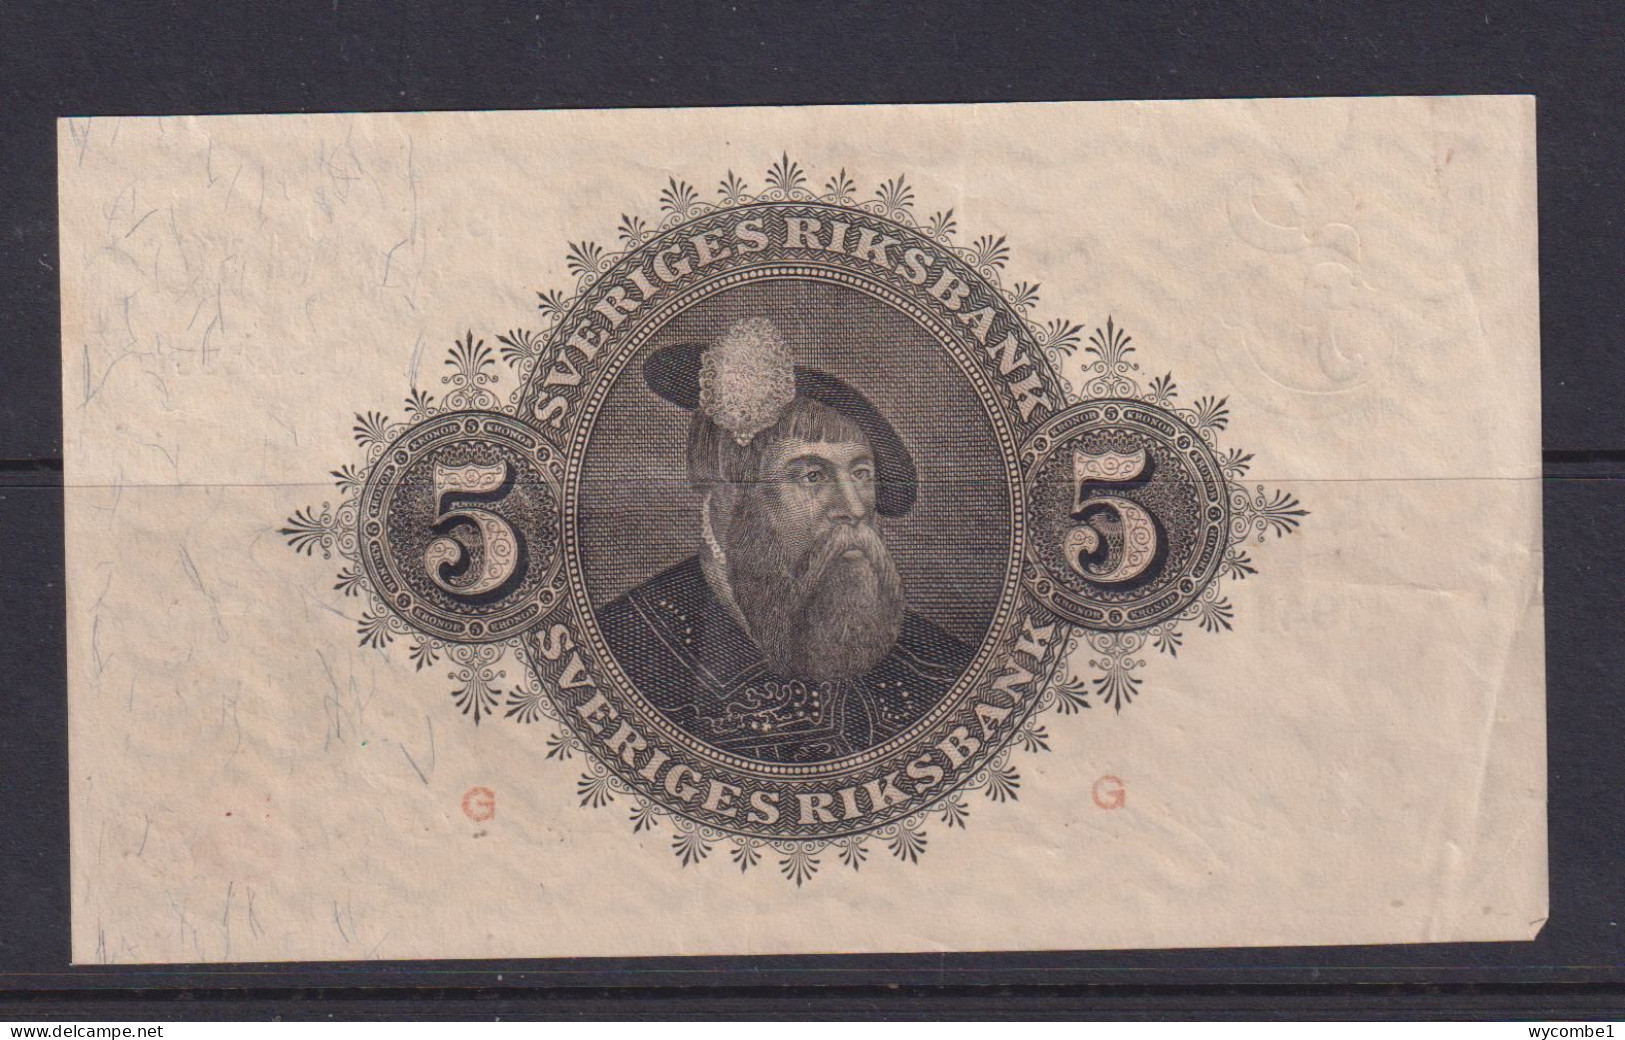 SWEDEN - 1941 5 Kronor Circulated Banknote As Scans - Svezia